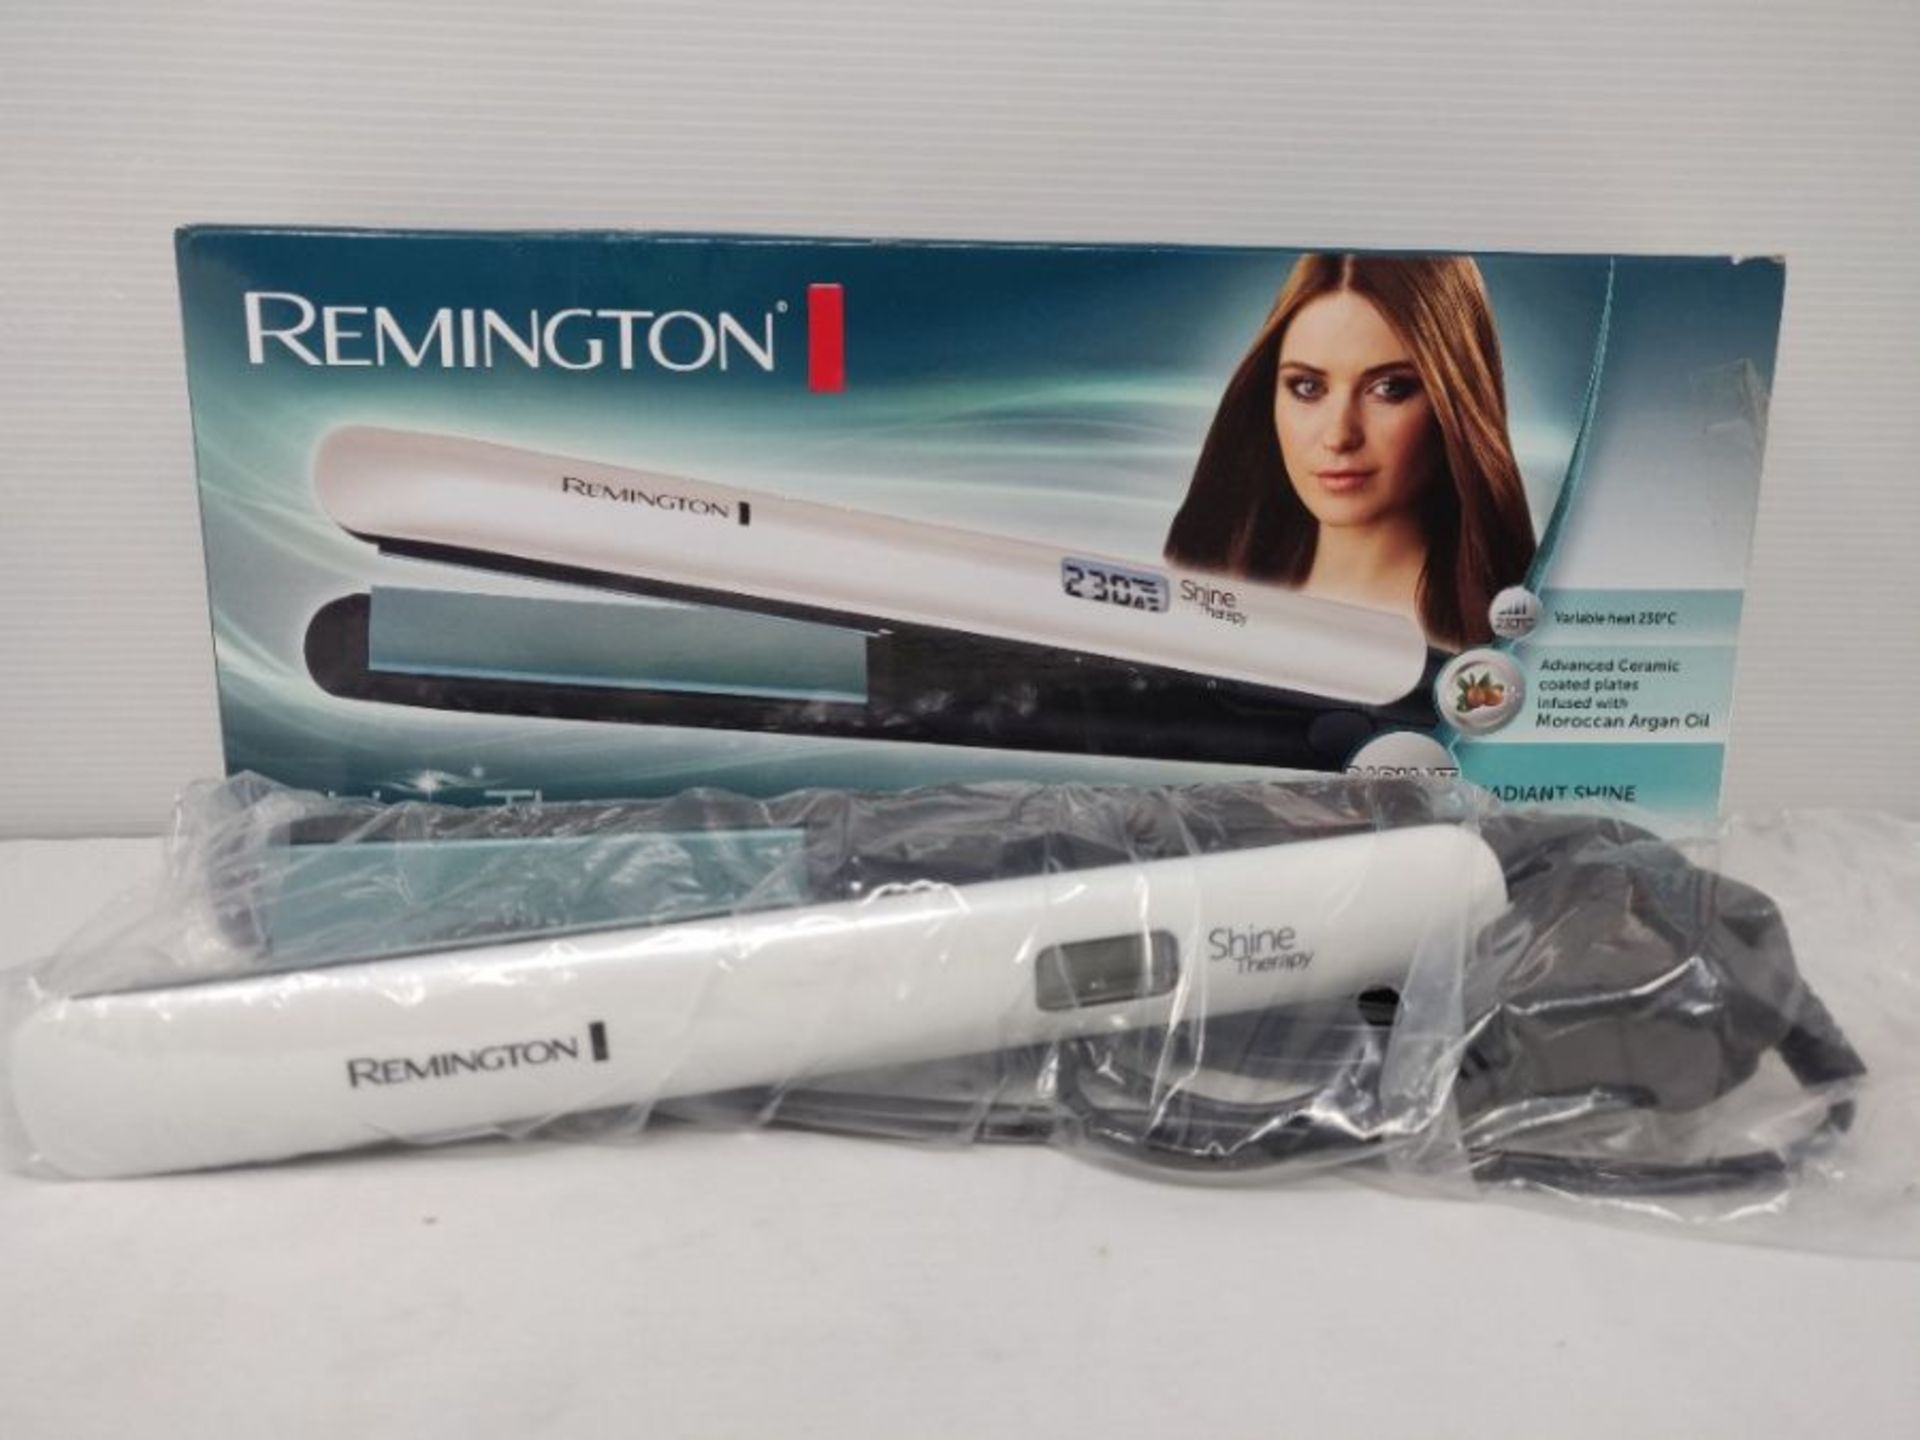 Remington Shine Therapy Advanced Ceramic Hair Straighteners with Morrocan Argan Oil fo - Image 2 of 2